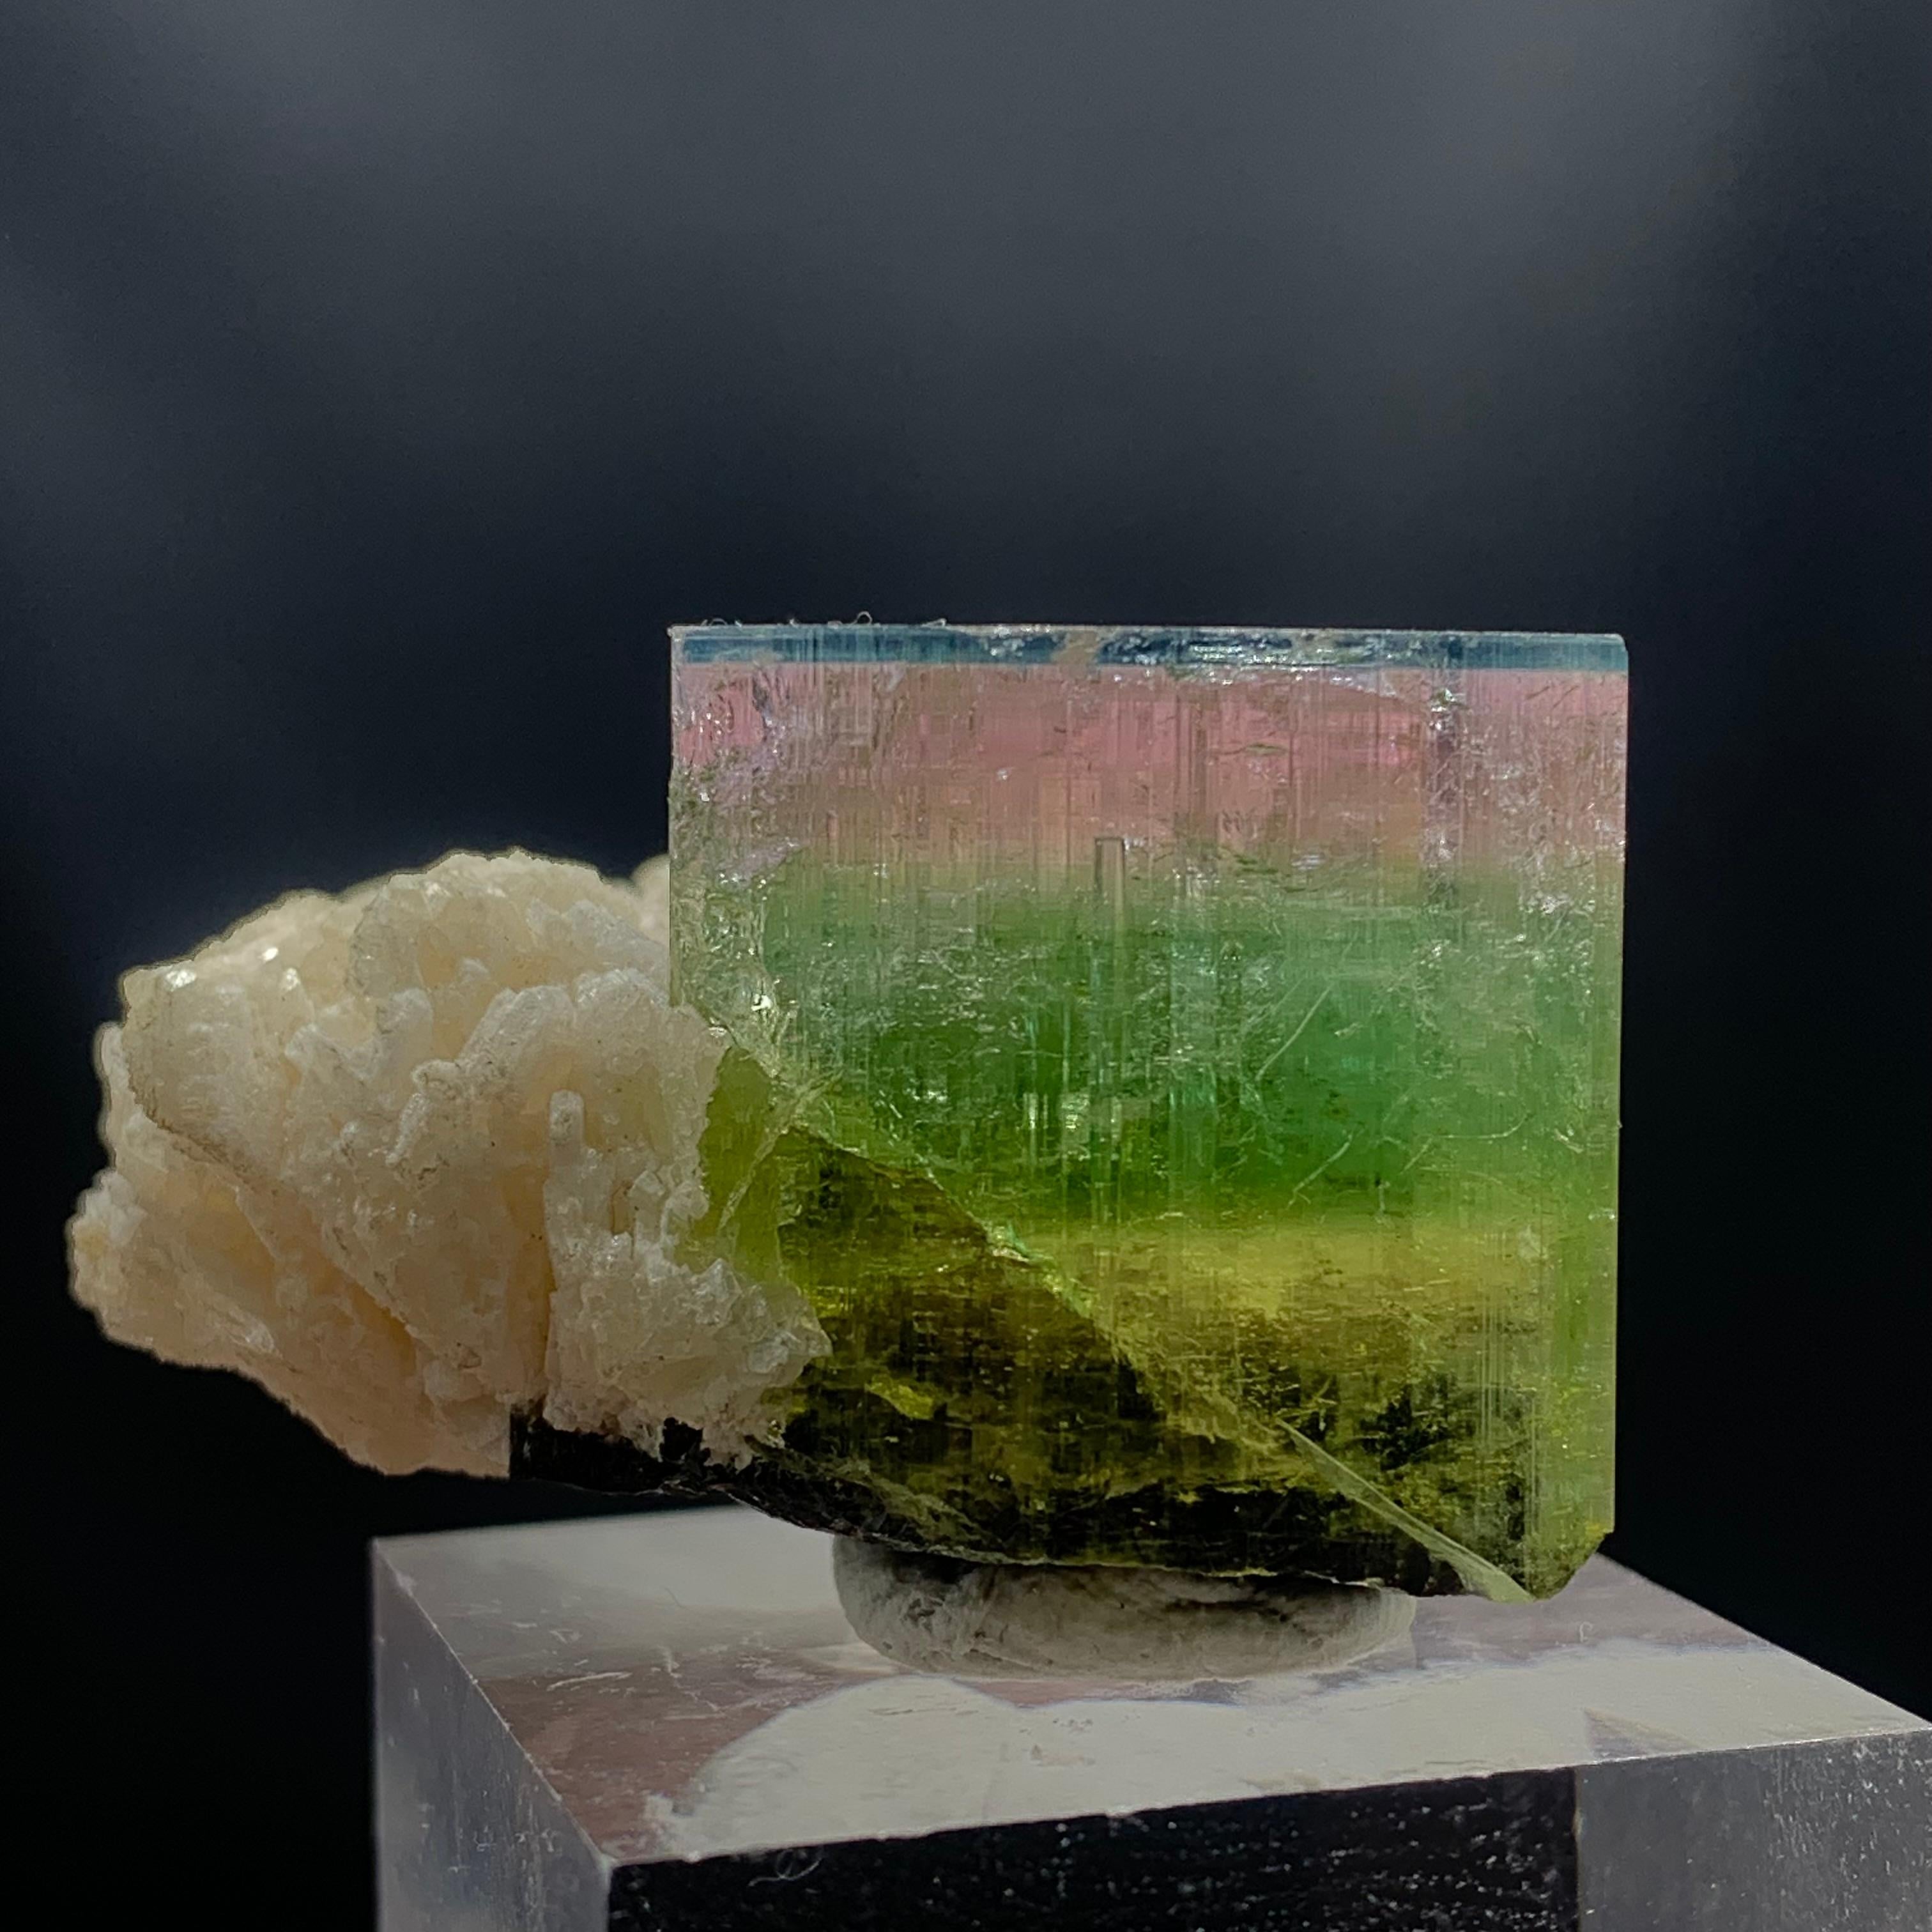 Gorgeous 160.40 Carat Tri Color Tourmaline Specimen From Nooristan Afghanistan 
WEIGHT: 160.40 grams
DIMENSIONS : 2.3 x 3.8 x 2.6 Cm
ORIGIN: Nooristan, Afghanistan
TREATMENT: None
Tourmaline is an extremely popular gemstone; the name Tourmaline